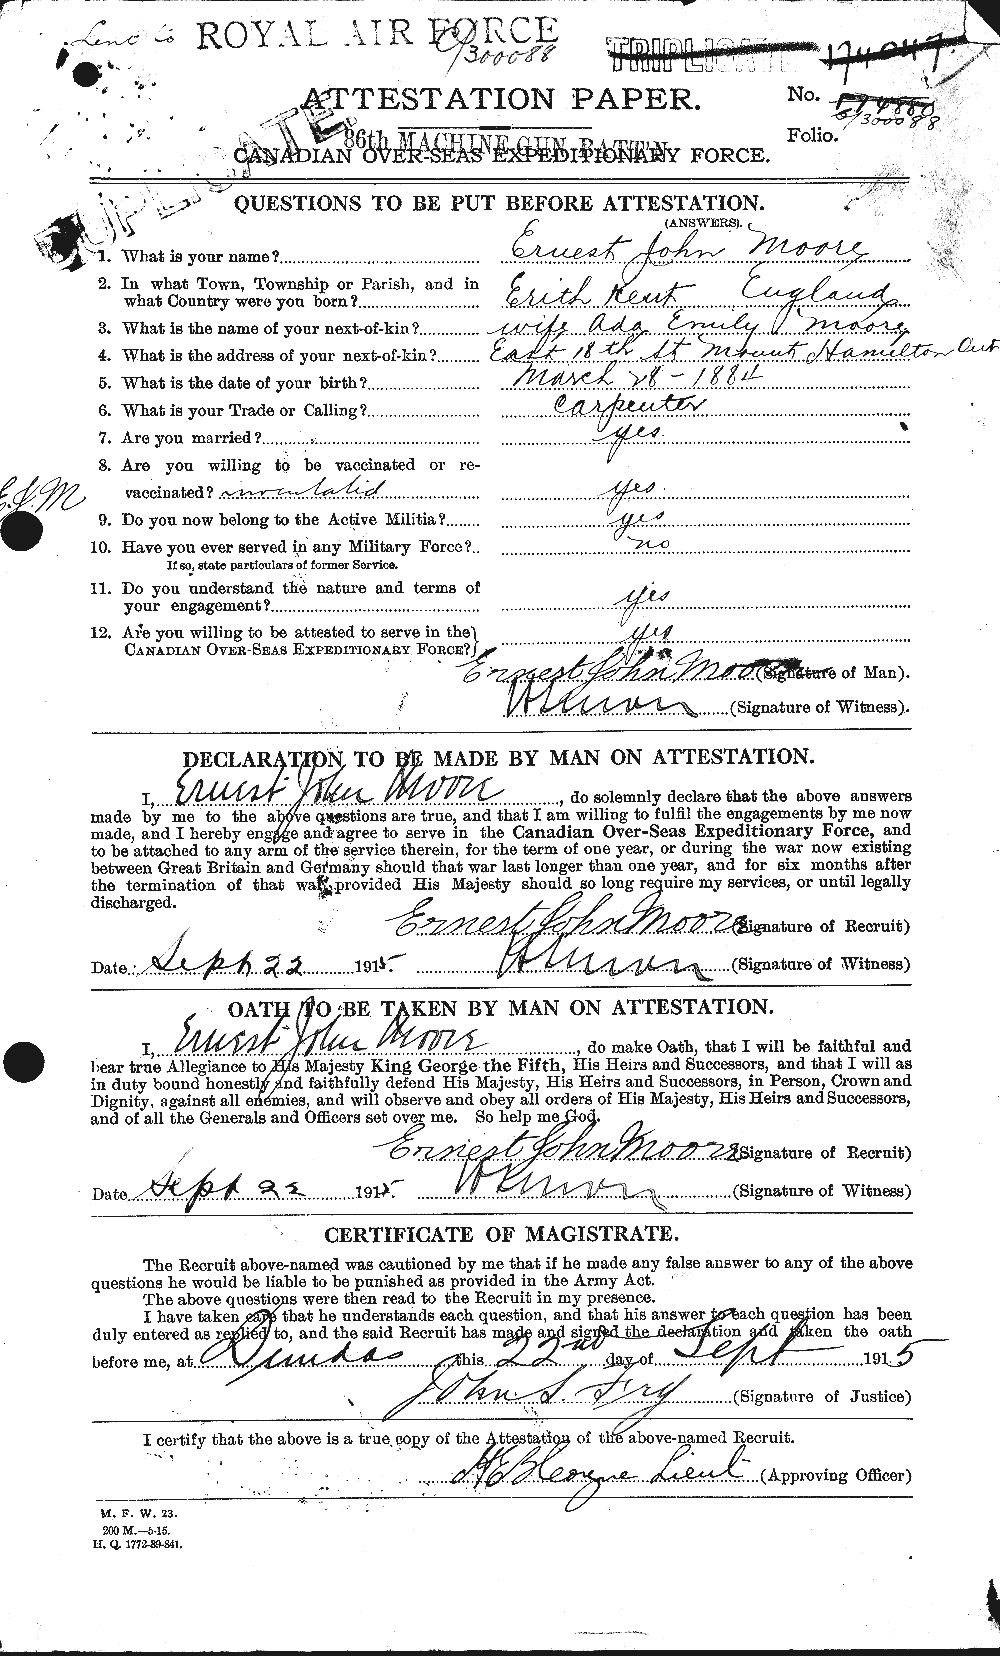 Personnel Records of the First World War - CEF 506672a